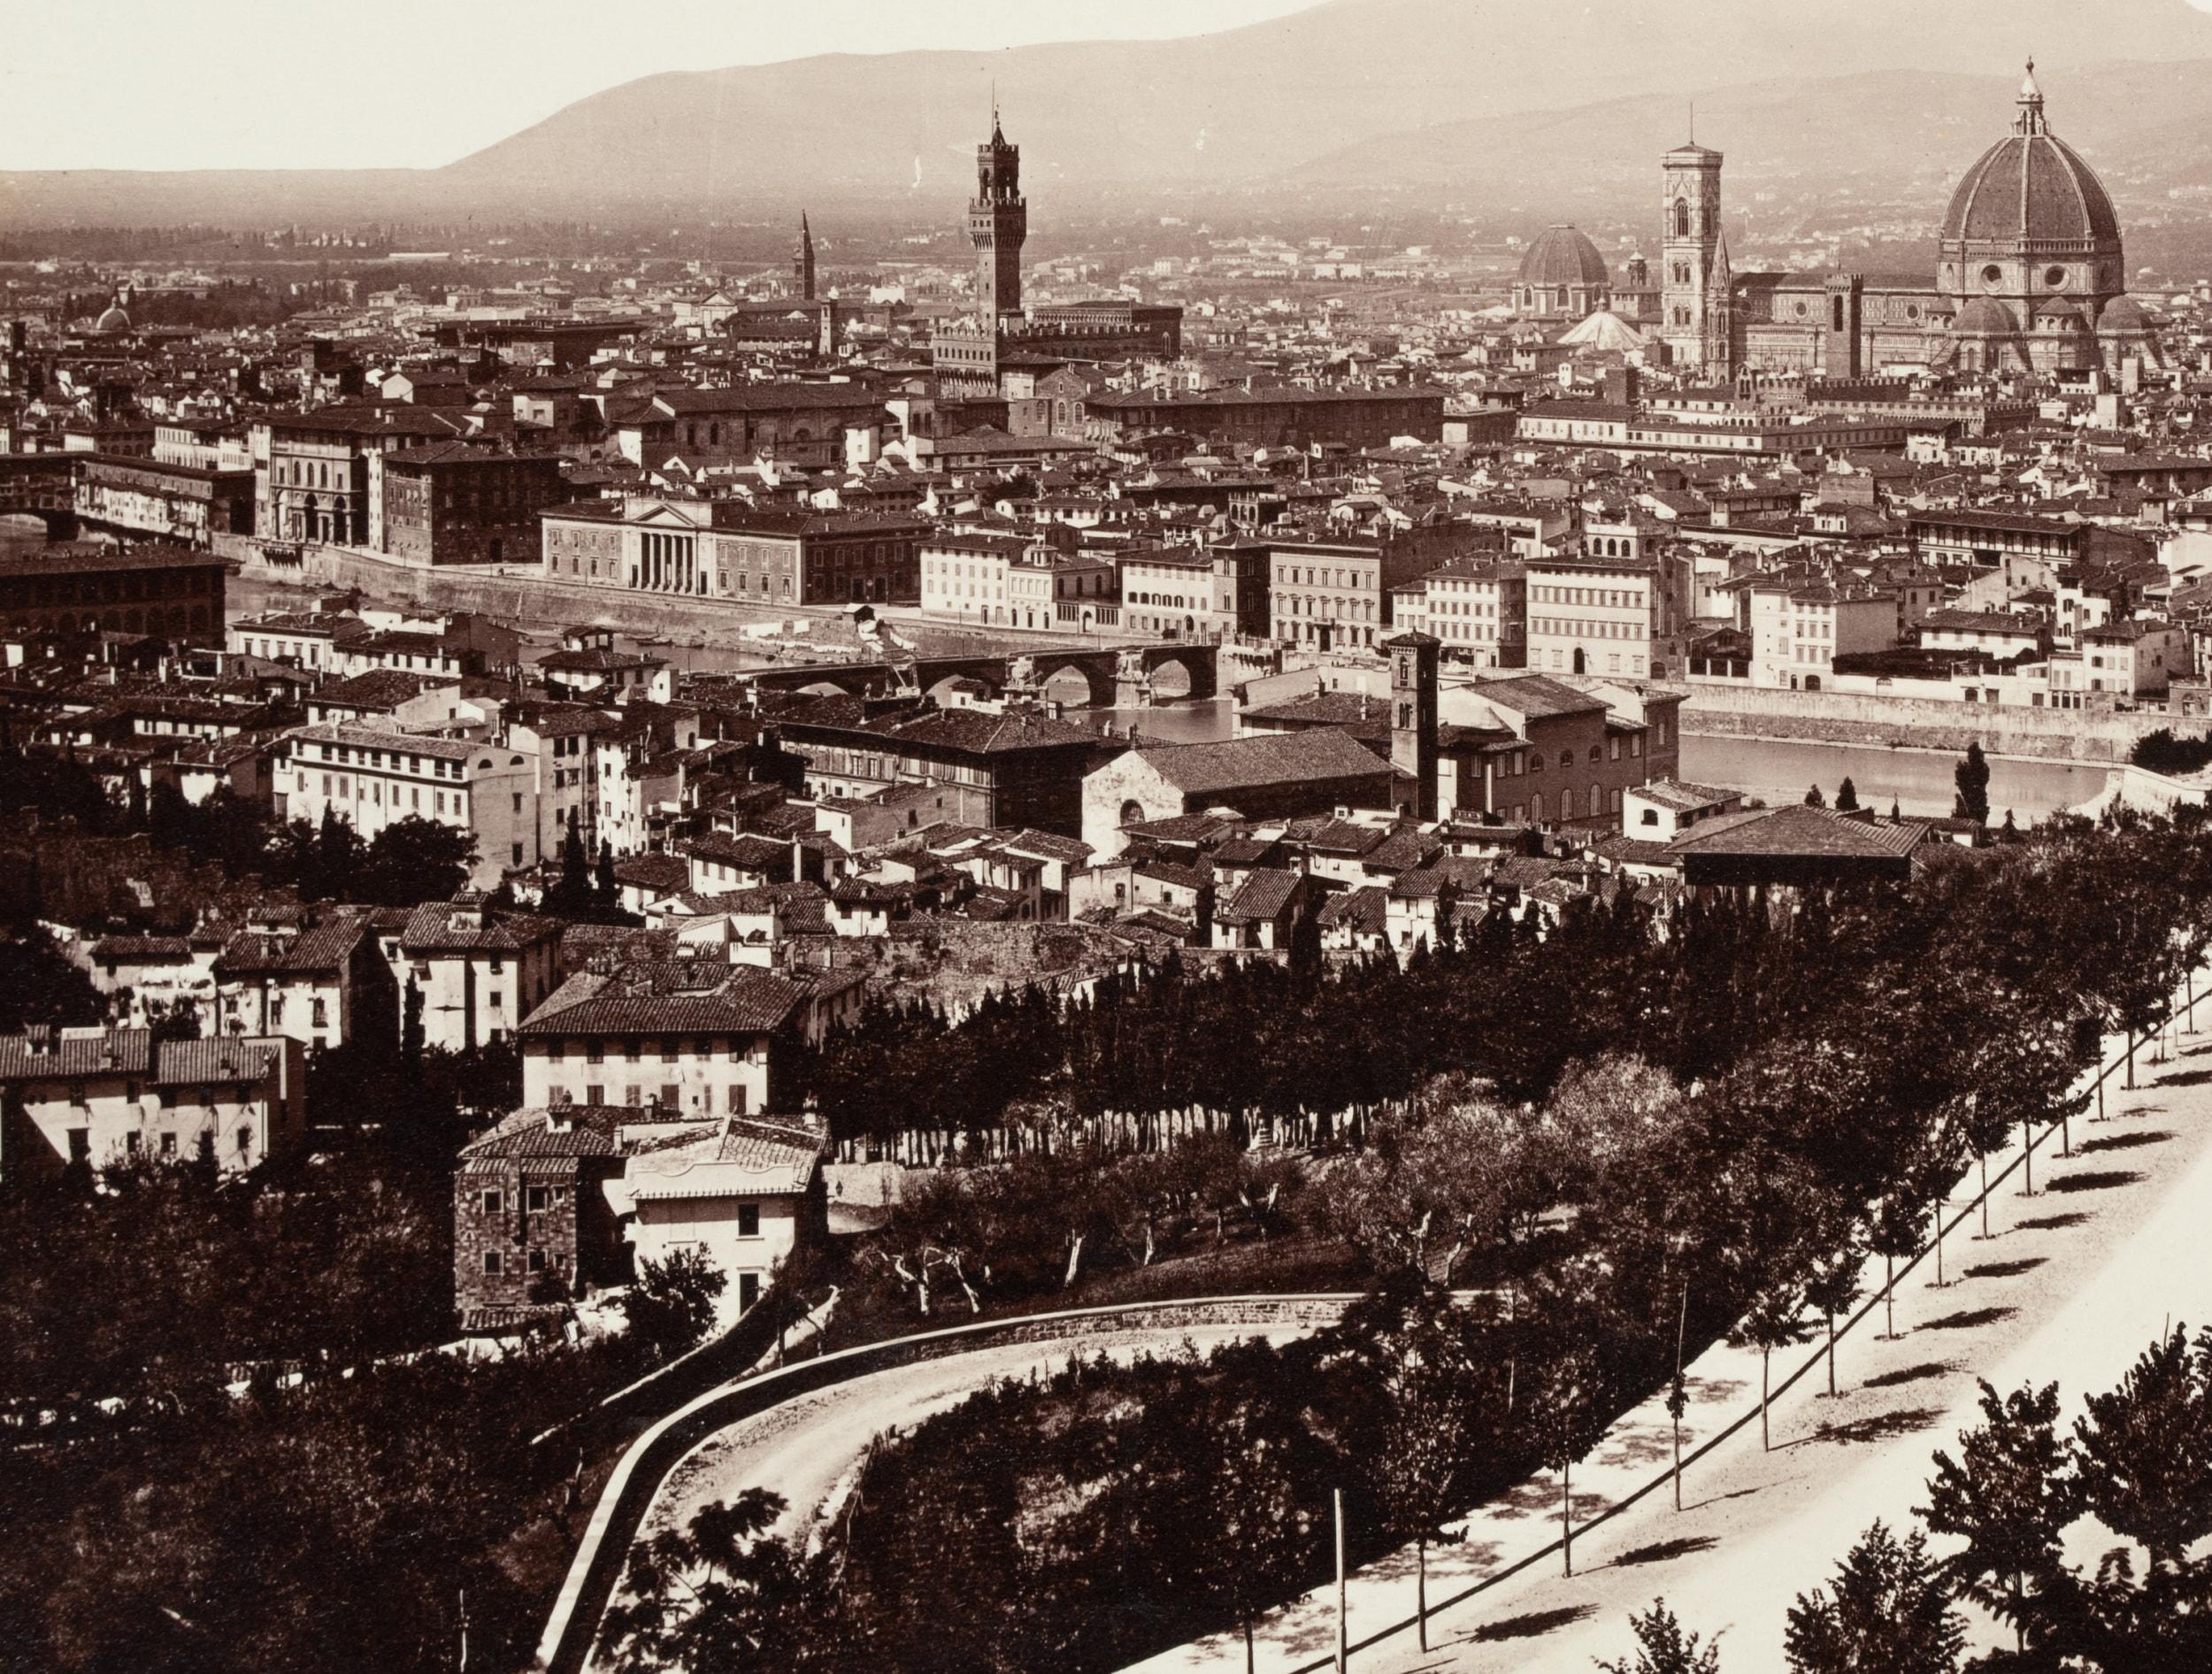 Fratelli Alinari (19th century) Circle: View of Florence with the Cathedral of Santa Maria del Fiore and the Palazzo Vecchio, whose towers and dome stand out clearly against the horizon, c. 1880, albumen paper print

Technique: albumen paper print,